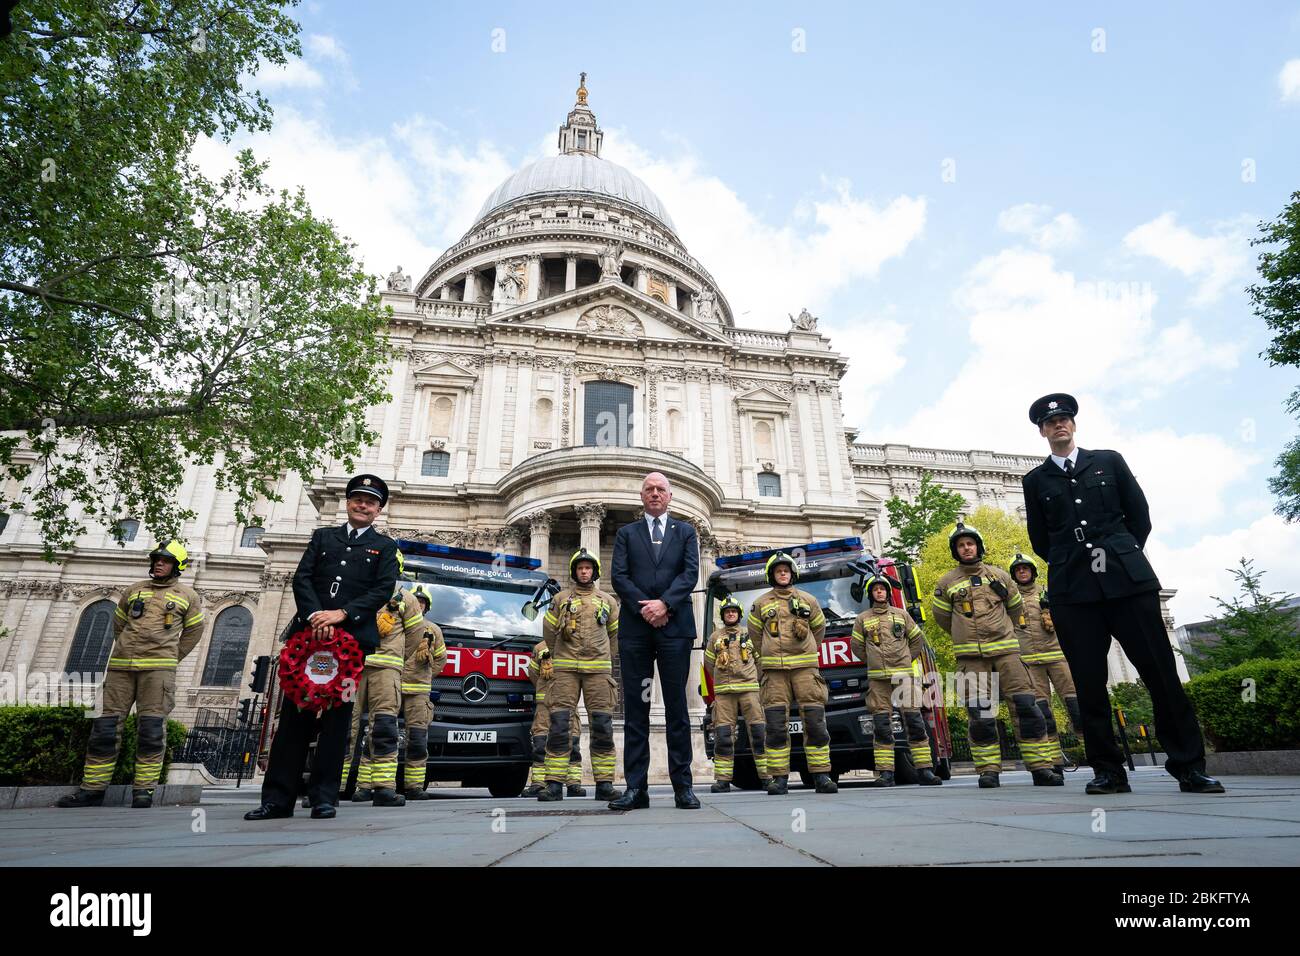 Members of the London Fire Brigade at the National Firefighters' Memorial at St Pauls, London, in memory of the firefighters that lost their lives in the line of duty. Stock Photo